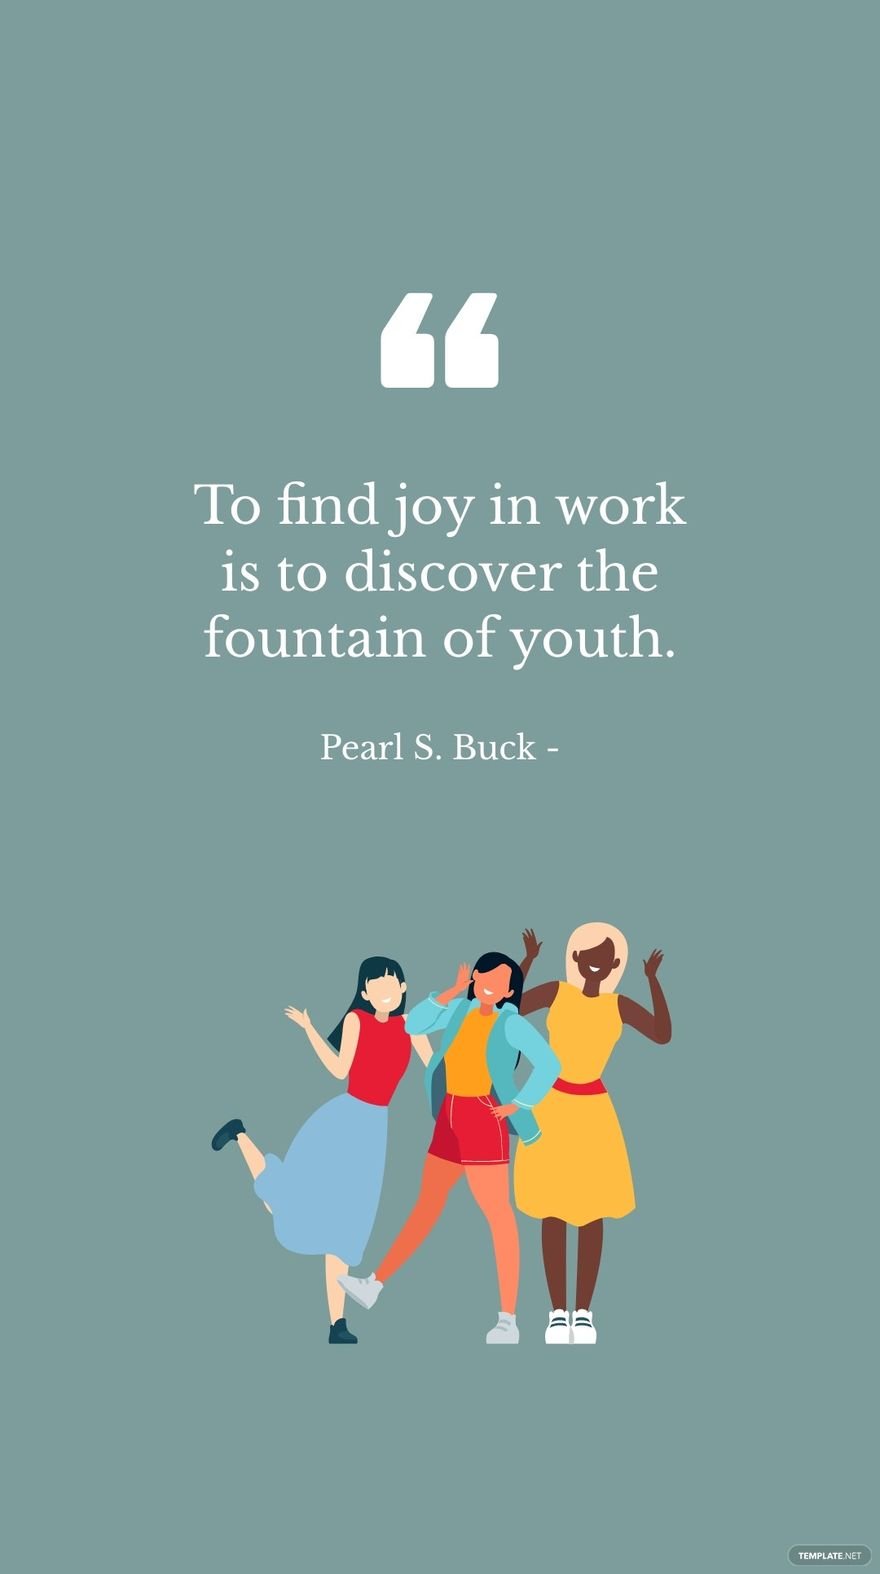 Pearl S. Buck - To find joy in work is to discover the fountain of youth.